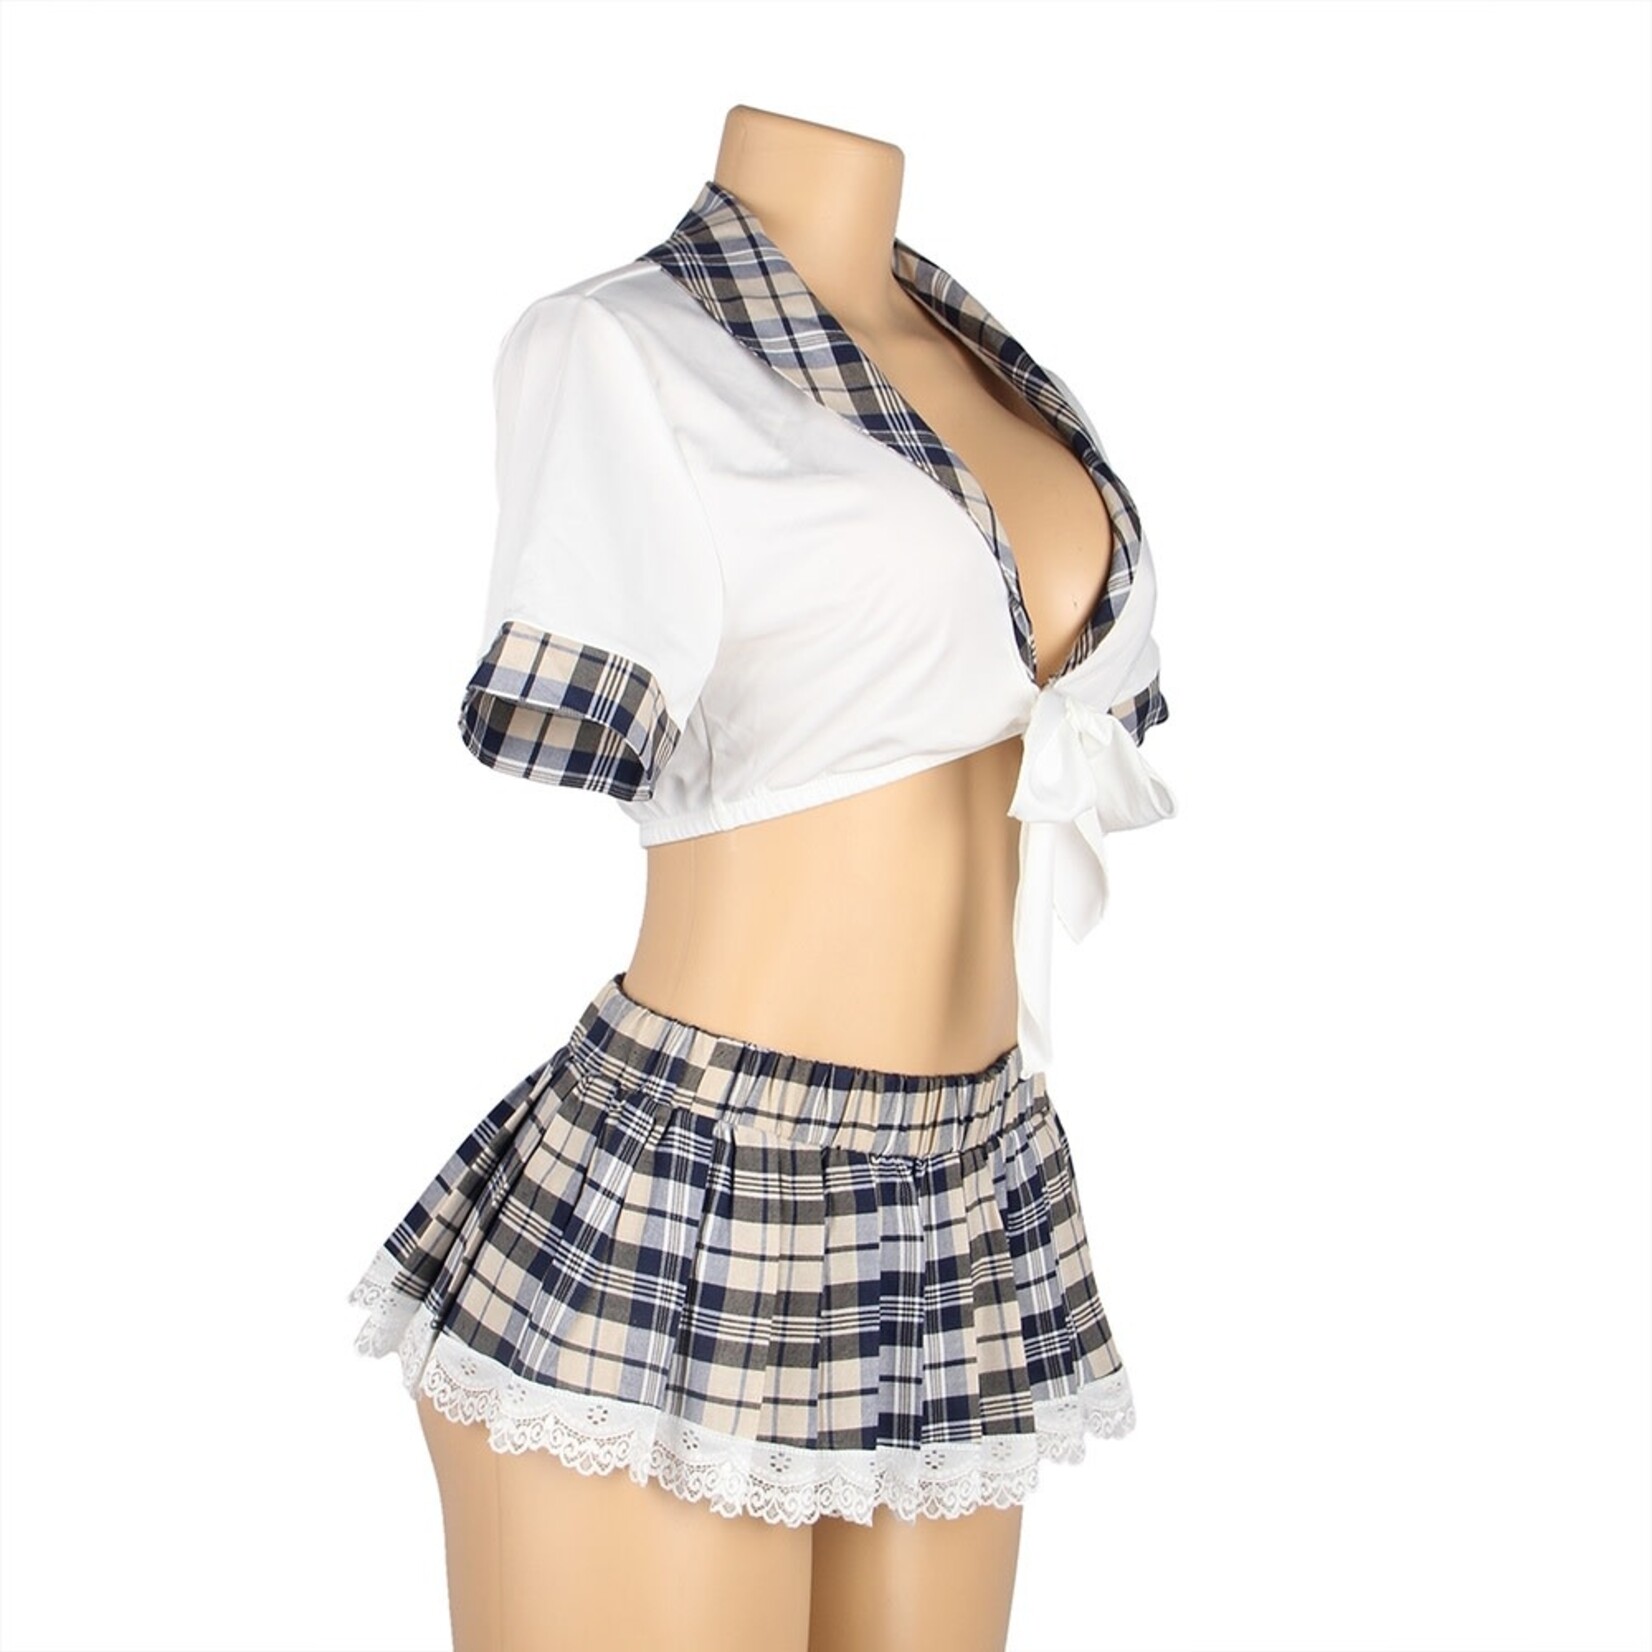 OH YEAH! -  SEXY WHITE CROP TOP PLAID SKIRT COSPLAY SUIT UNIFORM M-L